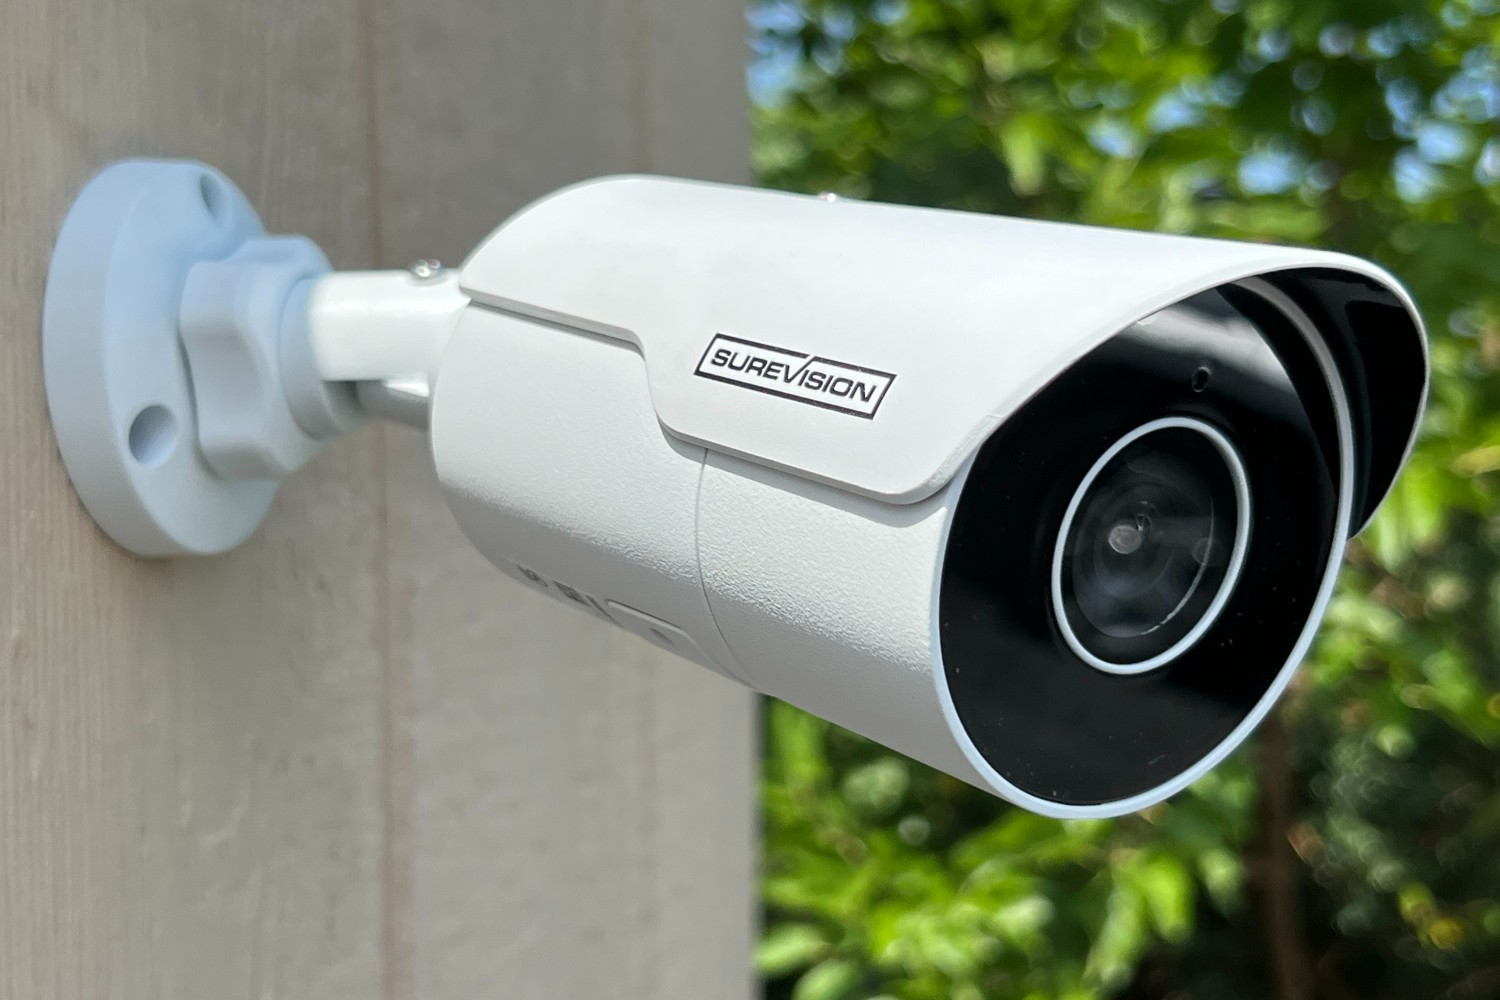 How To Tell If A Security Camera Is Recording